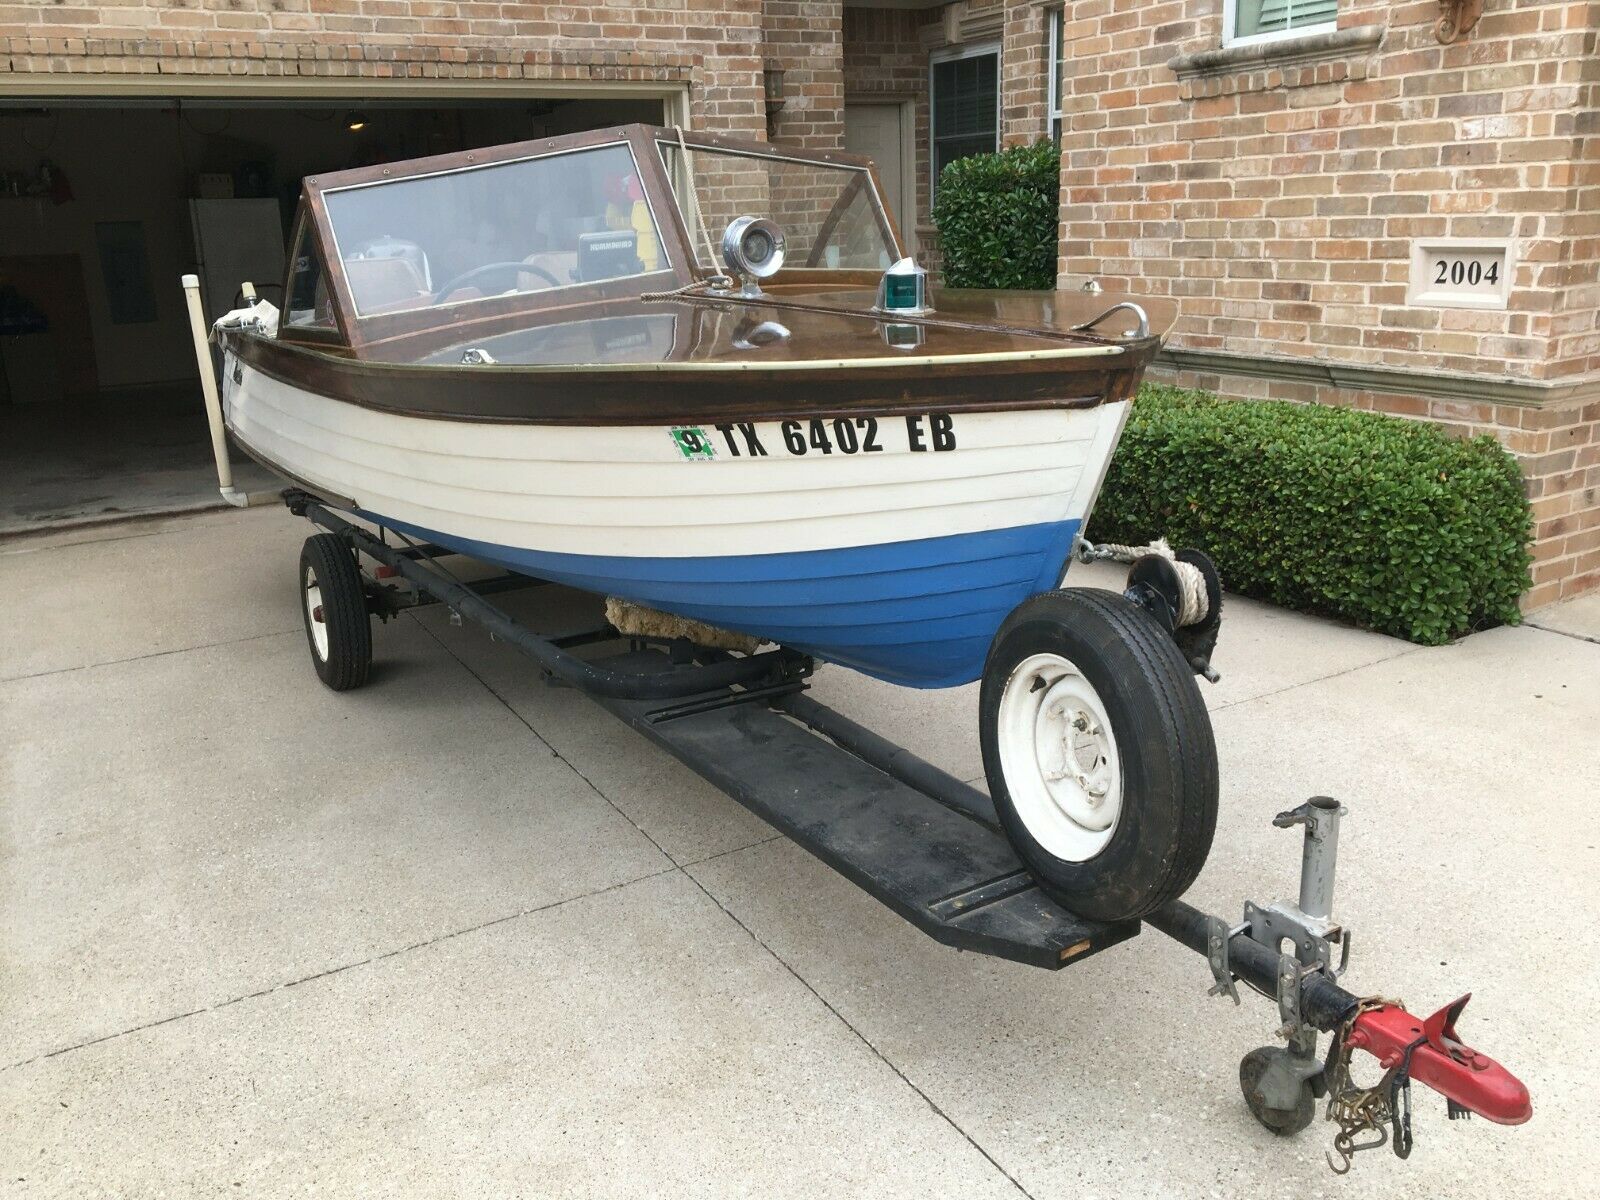 thompson lark 30 1958 for sale for ,500 - boats-from-usa.com